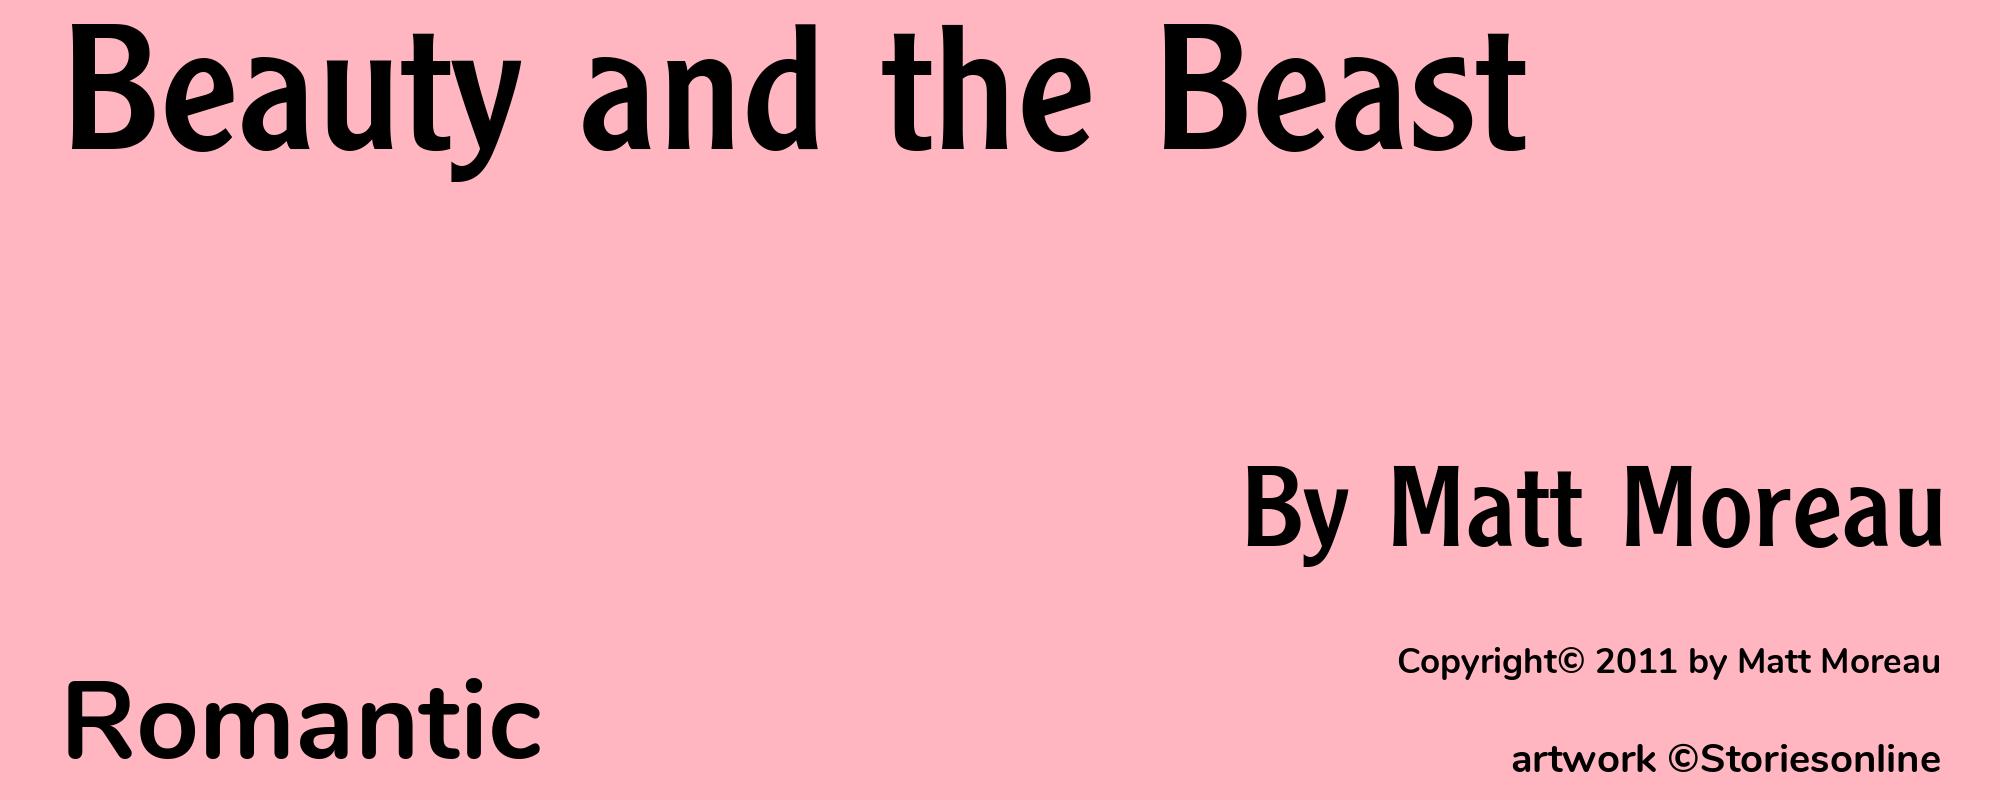 Beauty and the Beast - Cover